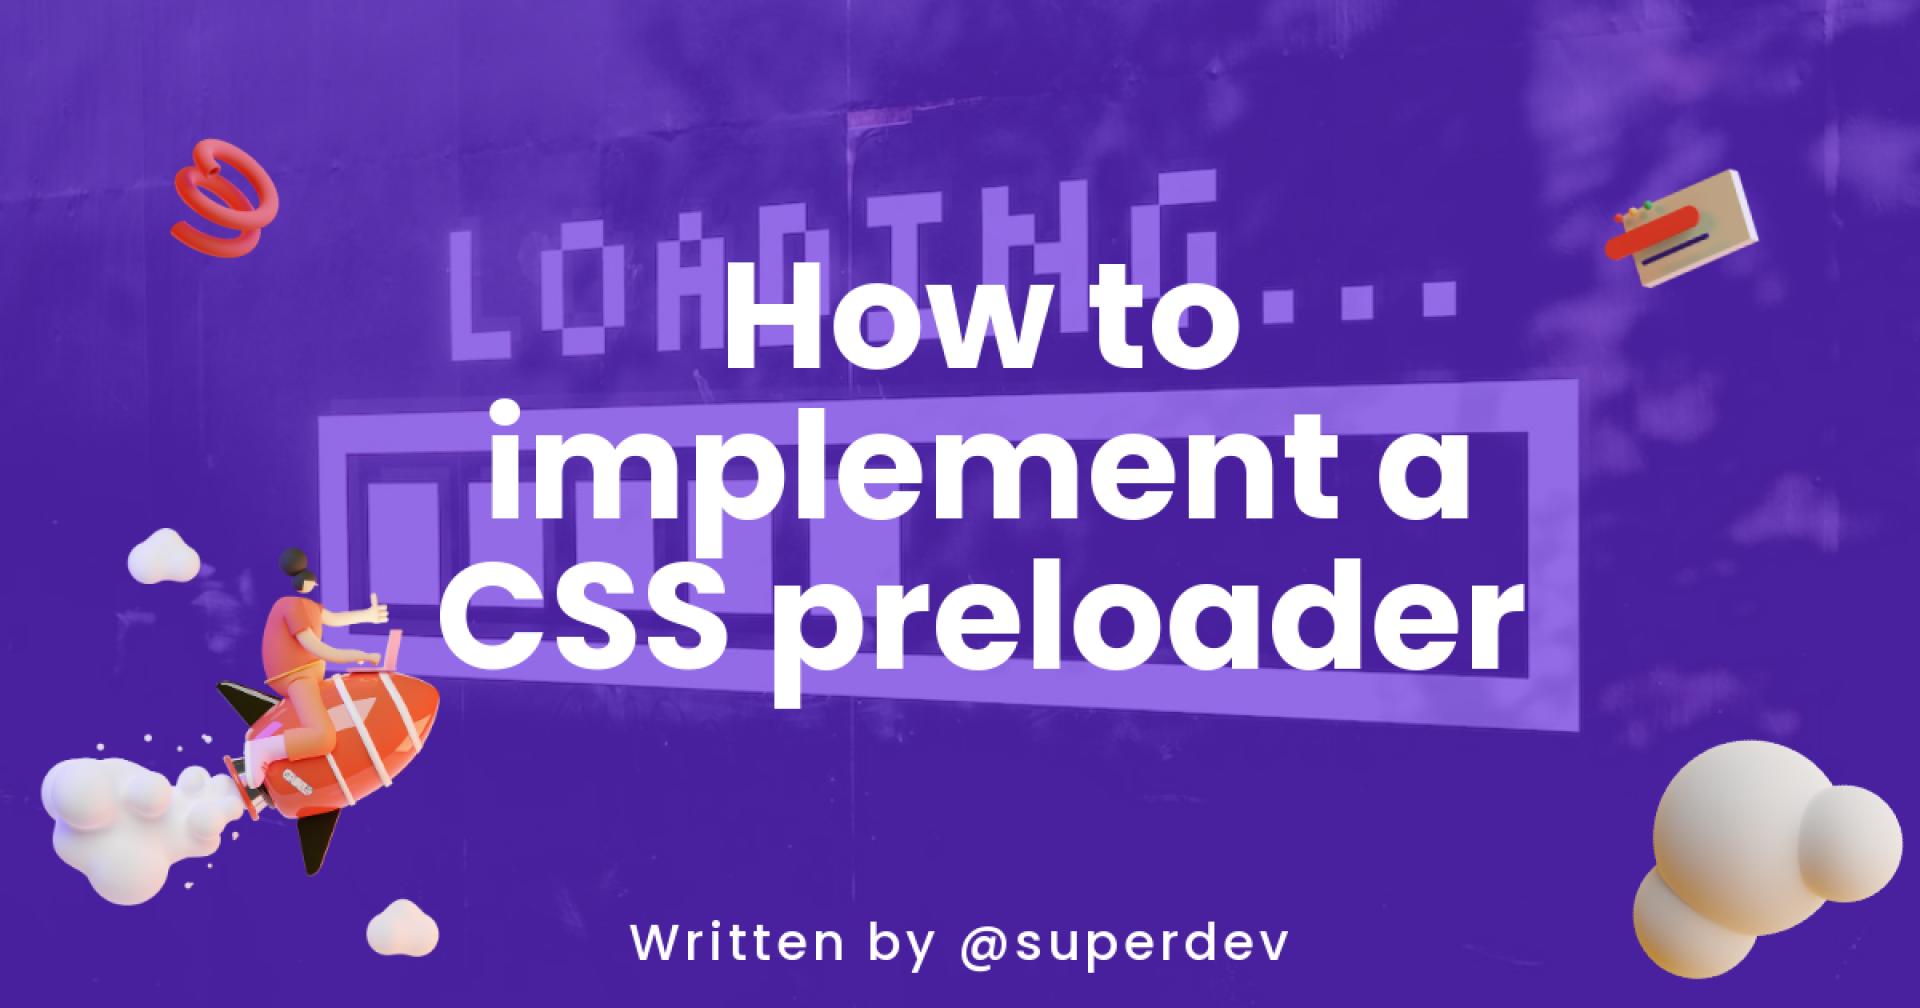 The Importance of a CSS Preloader and How to Implement One